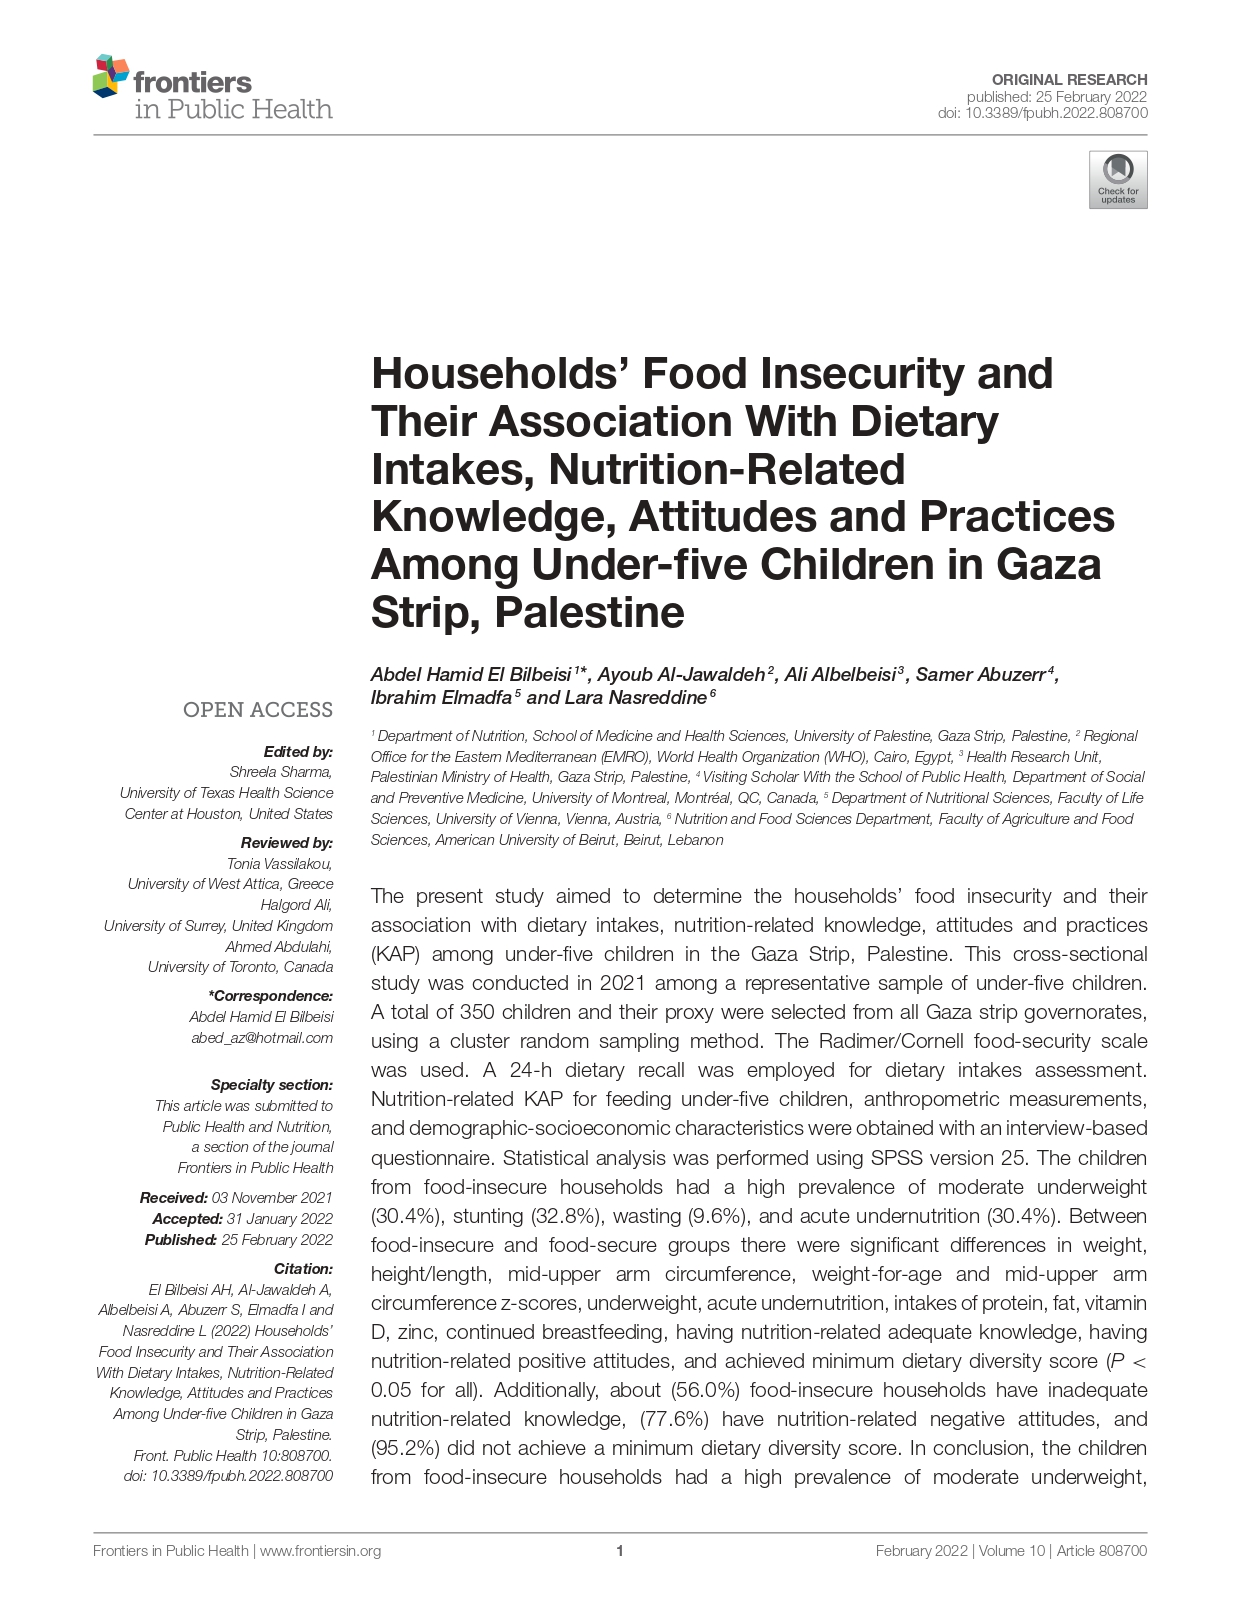 households_food_insecurity_and_their_association_with_dietary_intakes_nutrition-related_knowledge_attitudes_and_practices_among_under-five_children_in_gaza_strip_palestine